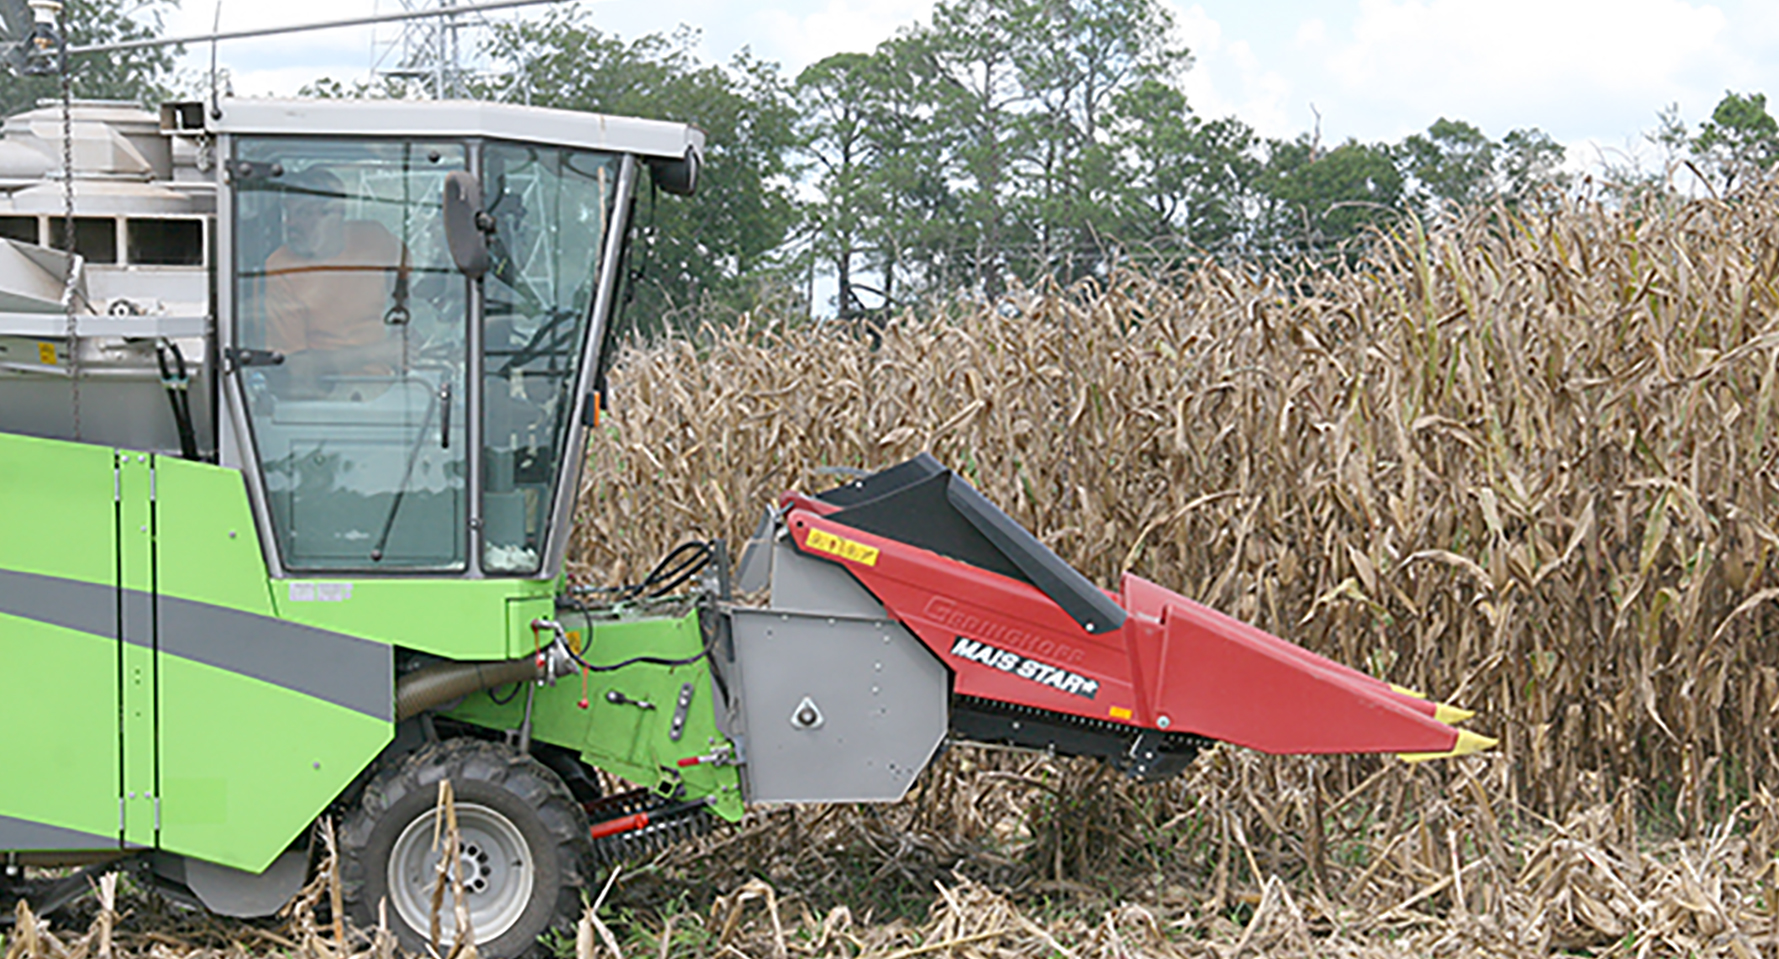 Along with Laurens County, reports from Georgia's Washington, Jefferson, Burke and Bulloch counties also indicated that farmers were adversely affected by too much rain, according to Reagan Noland, UGA Extension corn and small grains agronomist